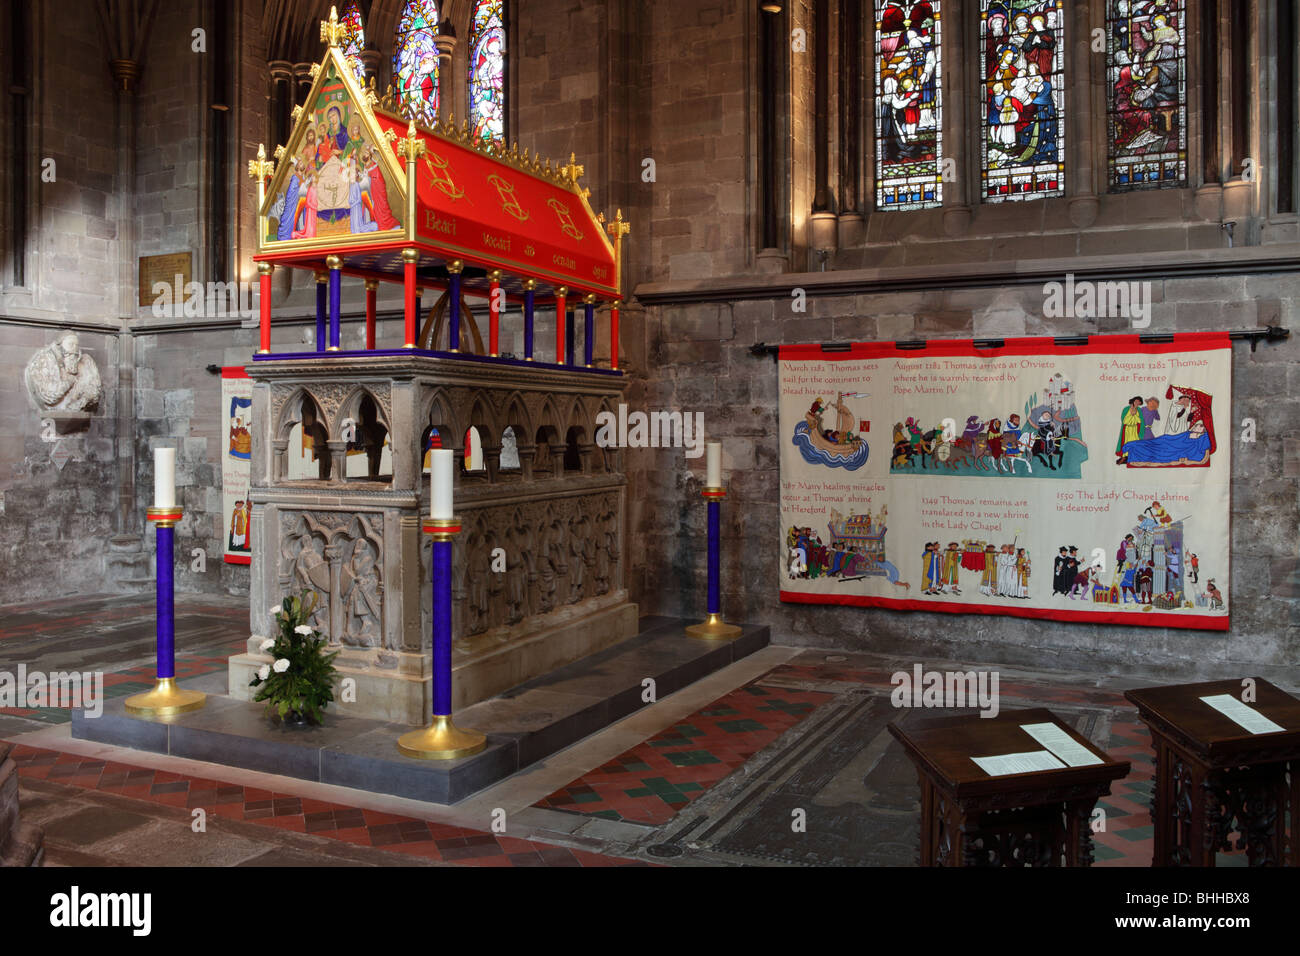 The Shrine of Saint Thomas de Cantilupe at Hereford Cathedral in England. Stock Photo